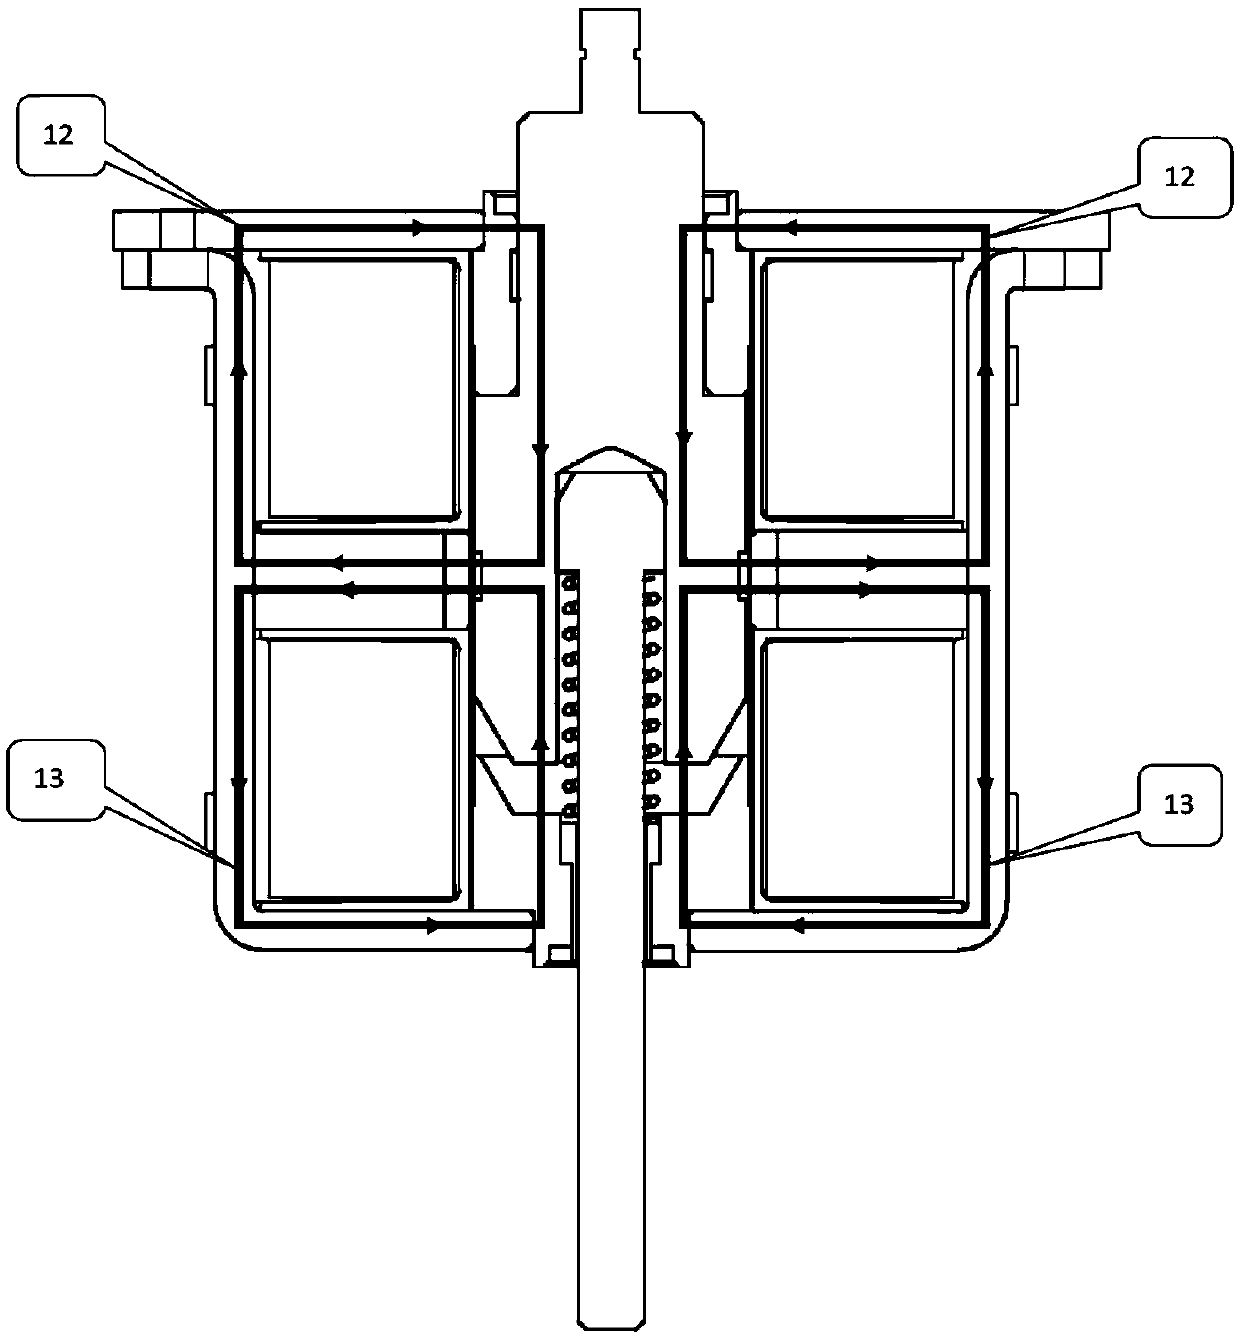 Middle-arranged magnetic steel magnetic circuit structure with inclined surface contact